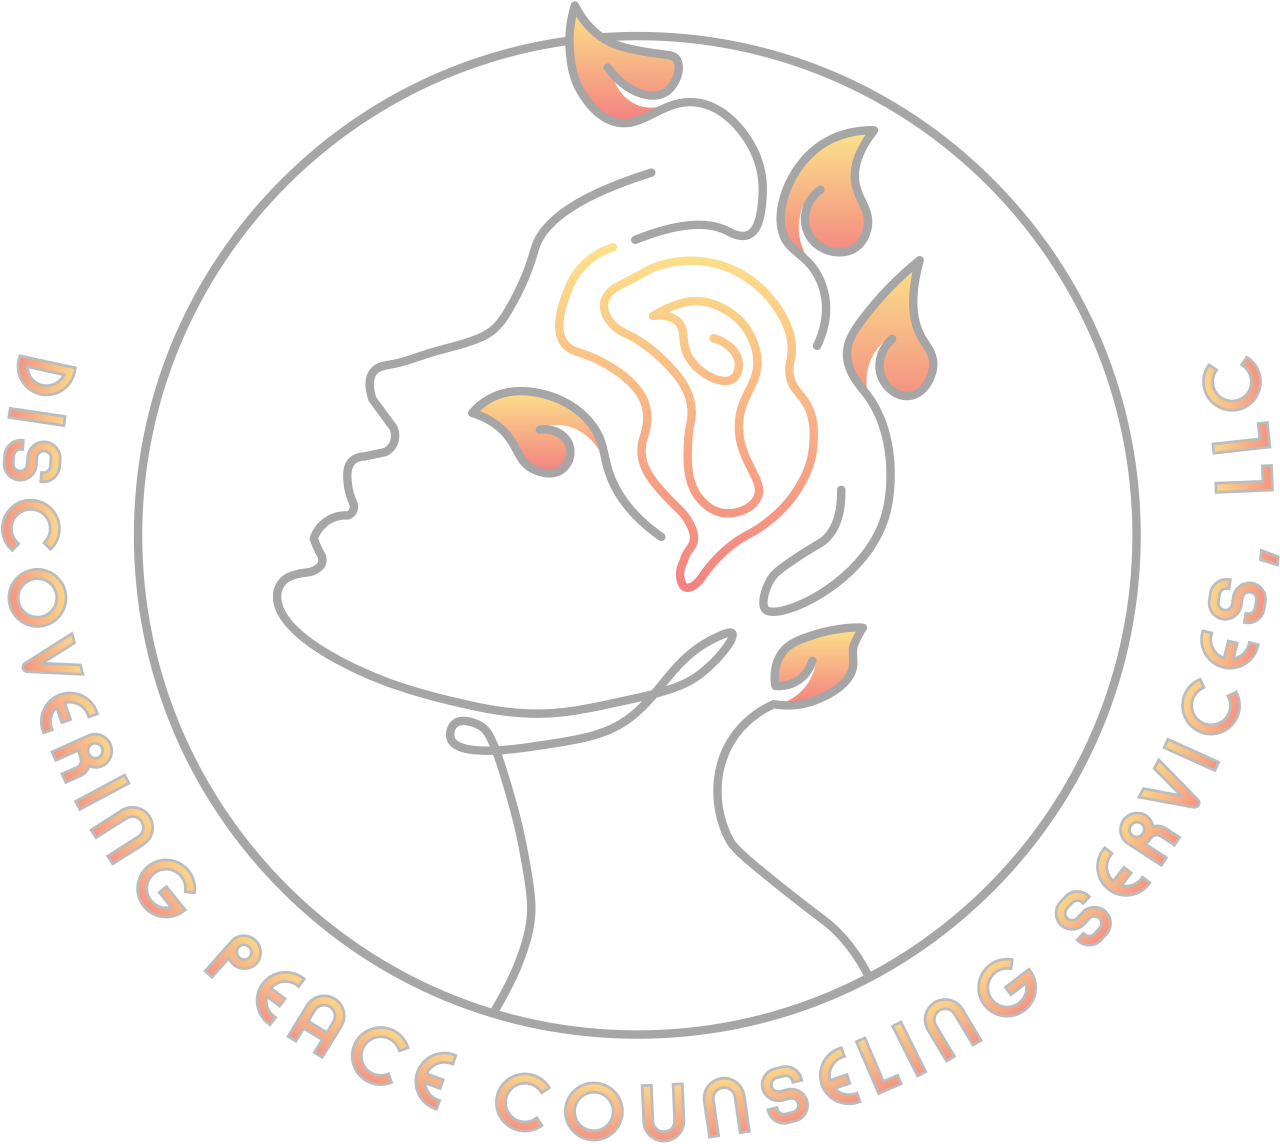 DISCOVERING PEACE COUNSELING SERVICES, LLC's logo